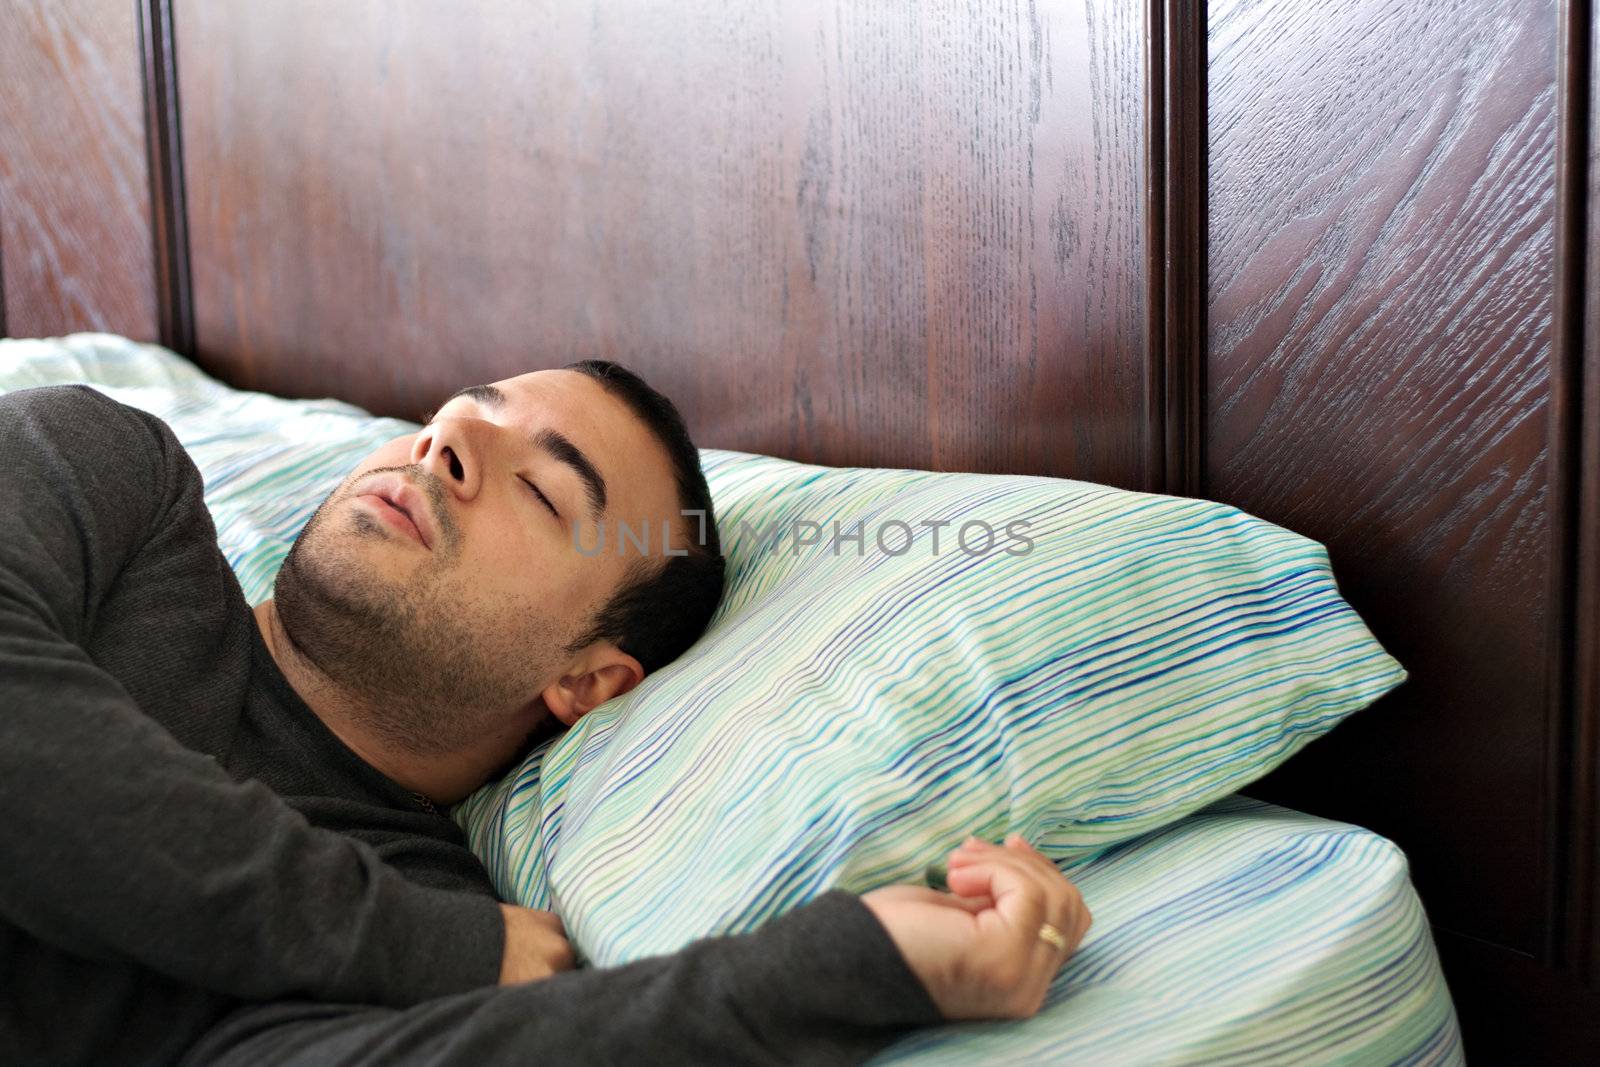 A man in his late 20s is fast asleep in bed.